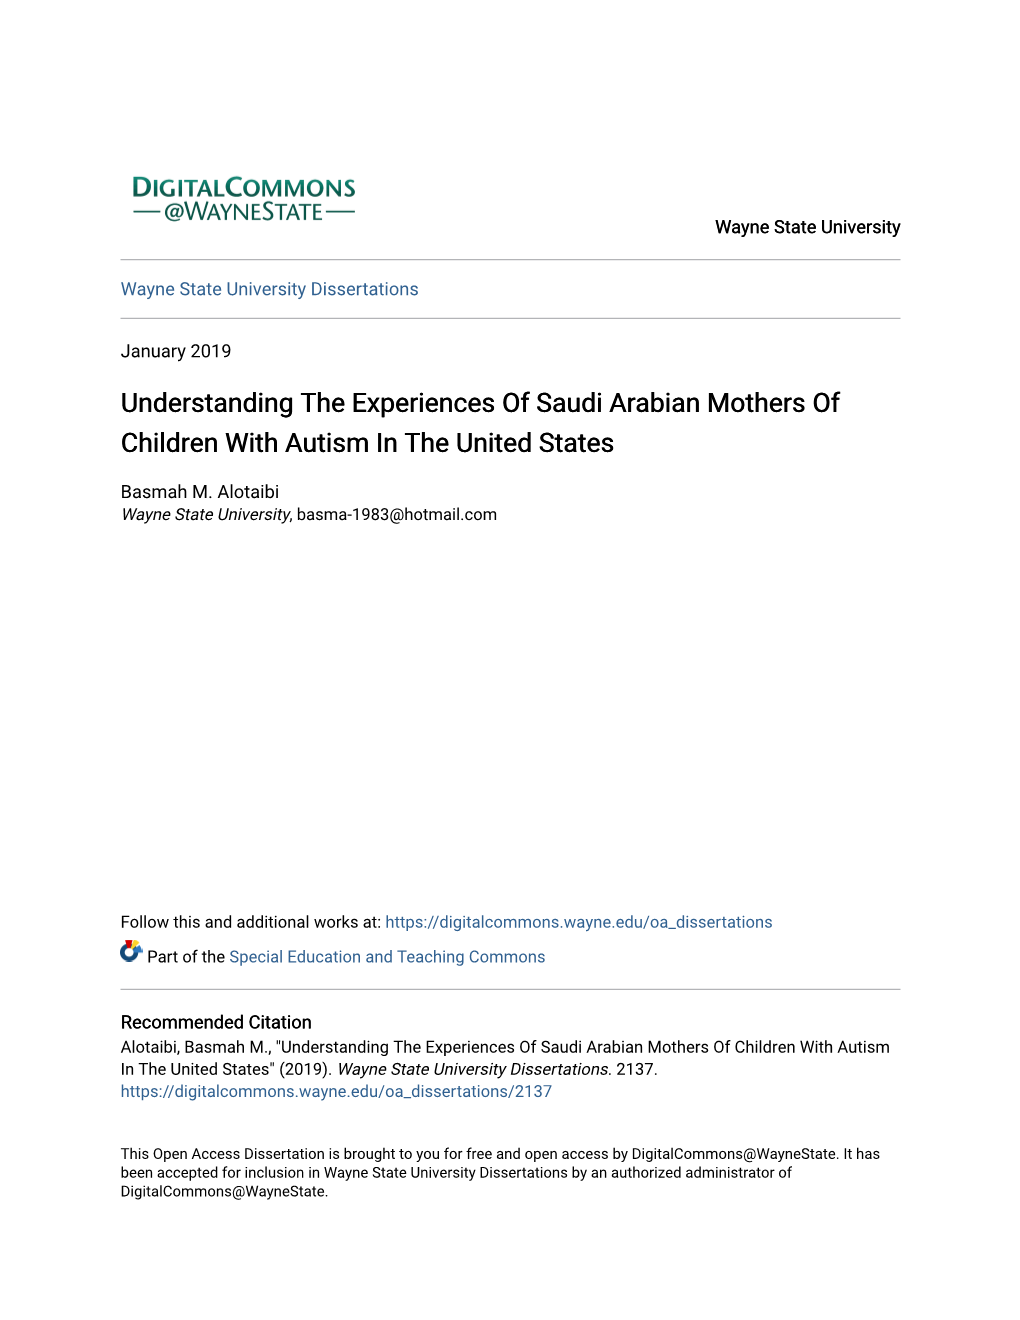 Understanding the Experiences of Saudi Arabian Mothers of Children with Autism in the United States